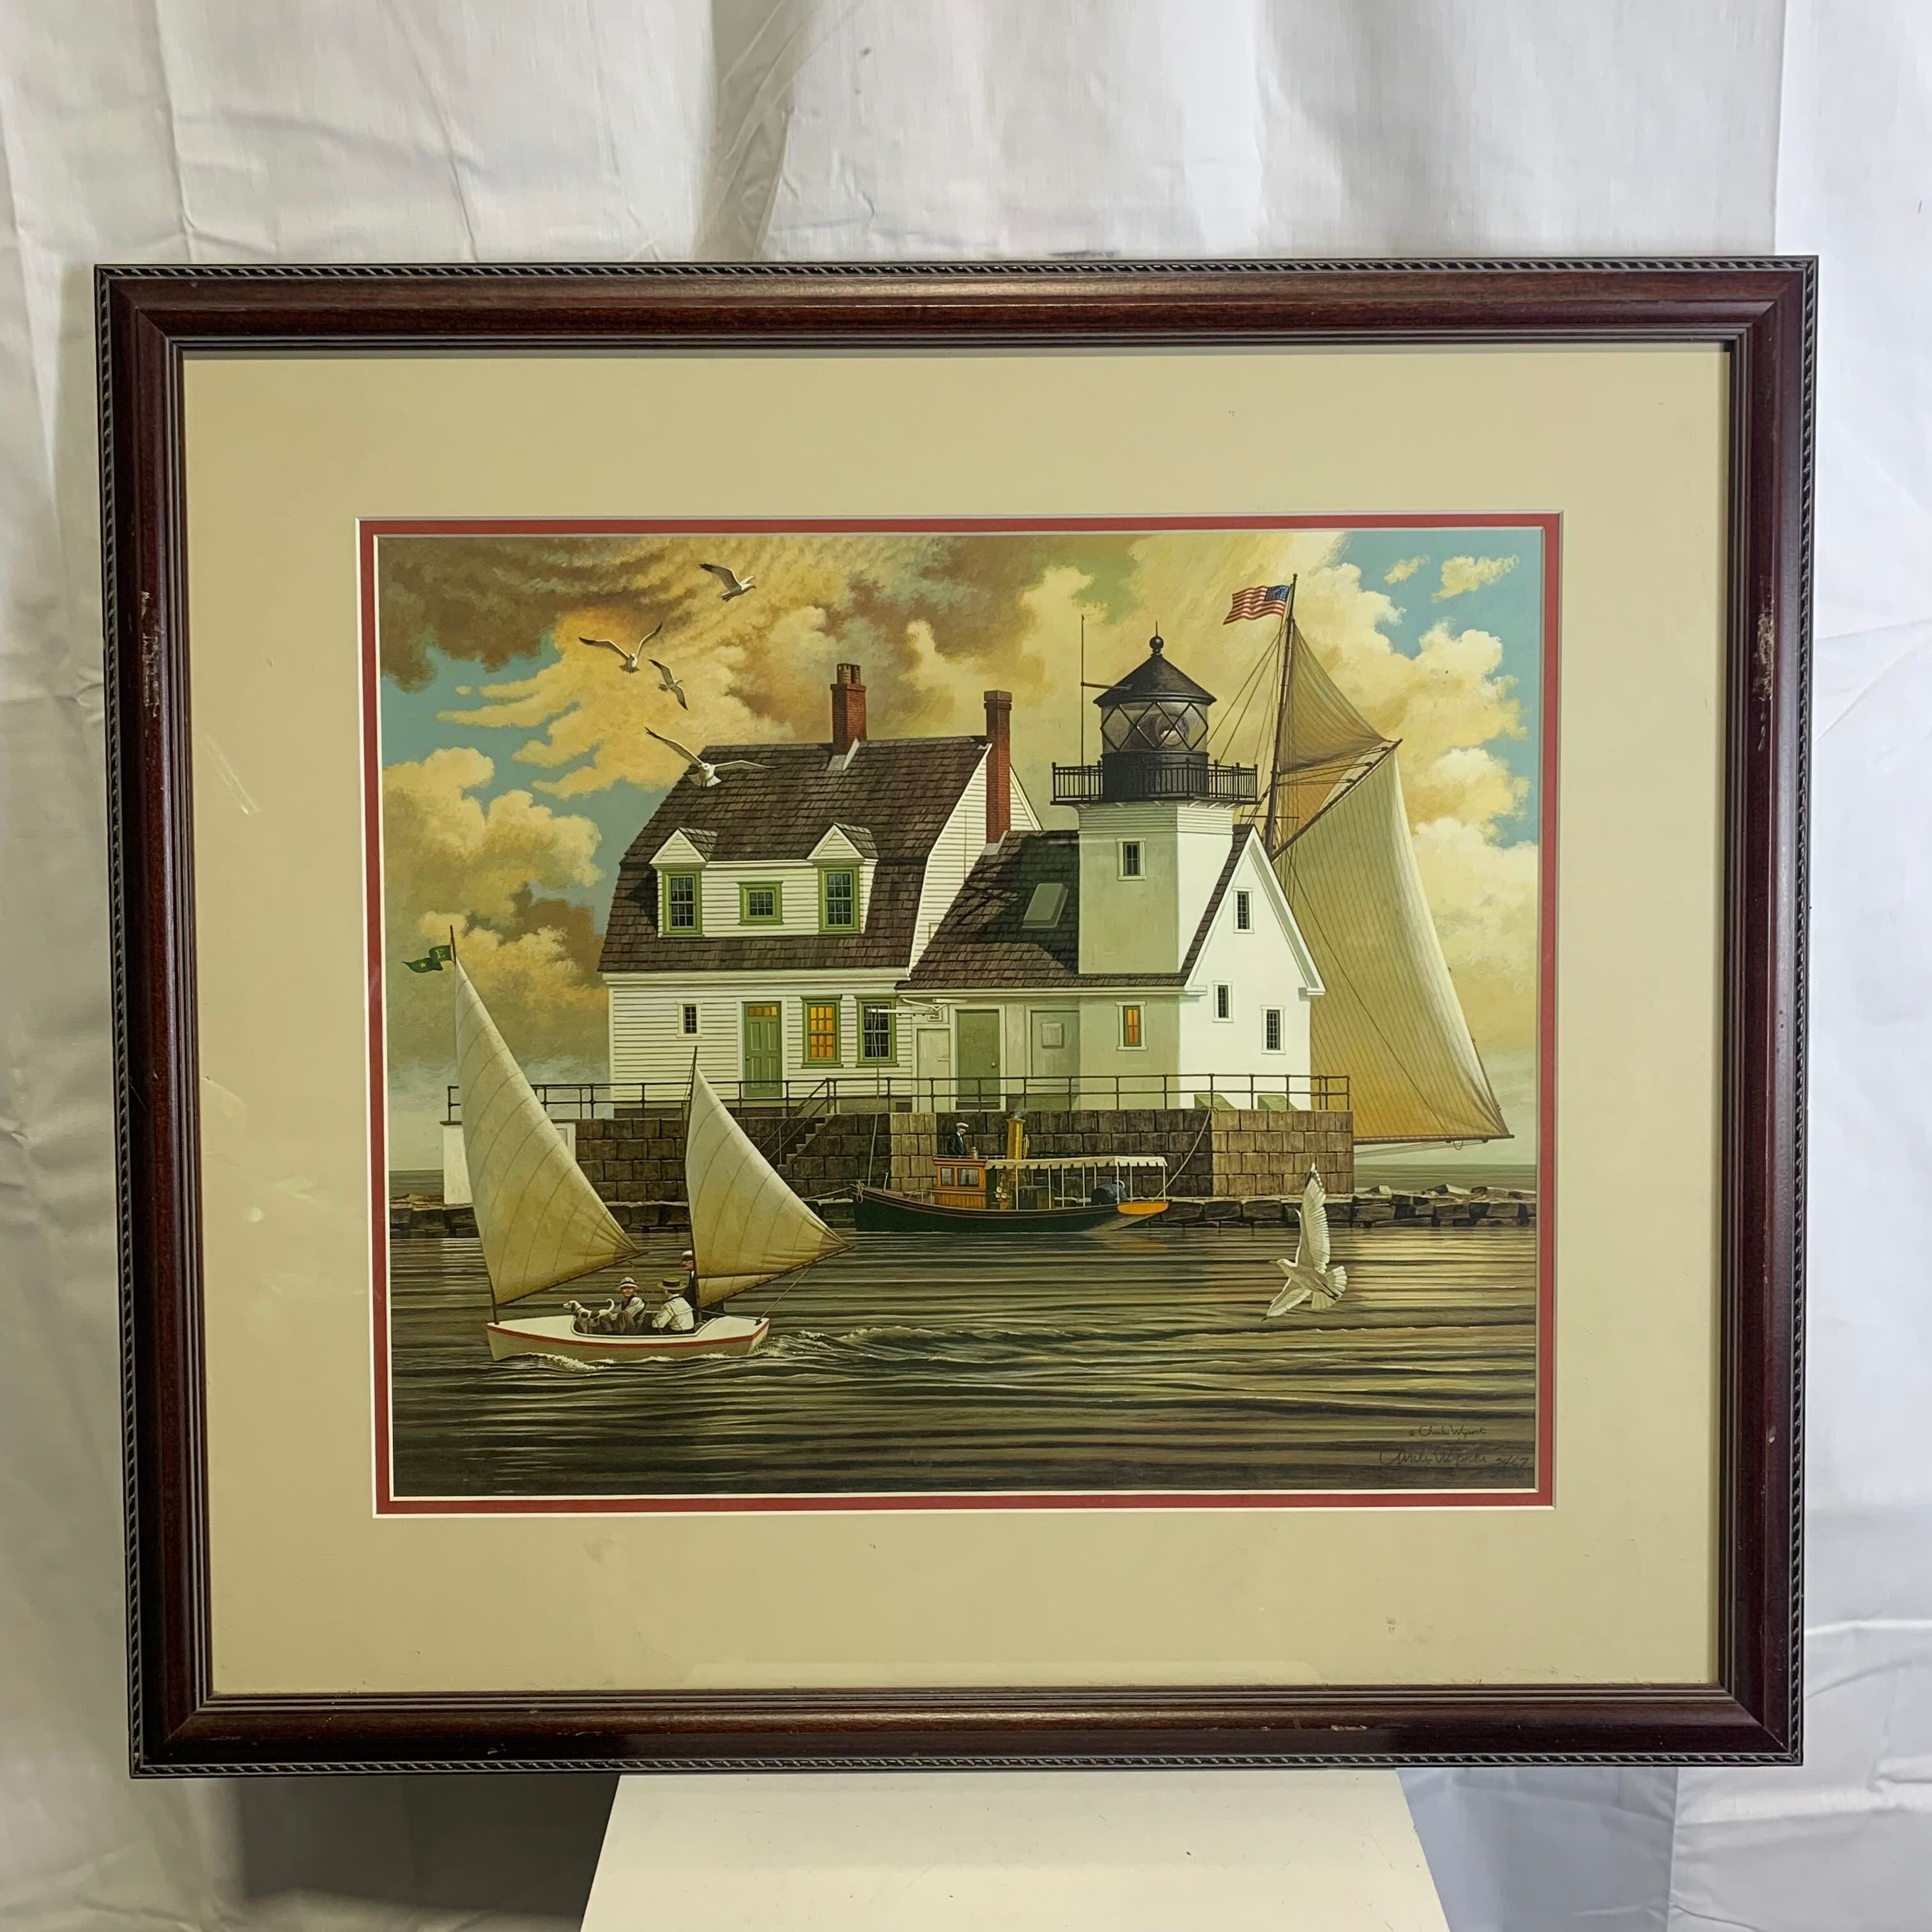 26"x 23" Rockland Breakwater Light By Charles Wysocki Framed and Signed Print 2467/2500